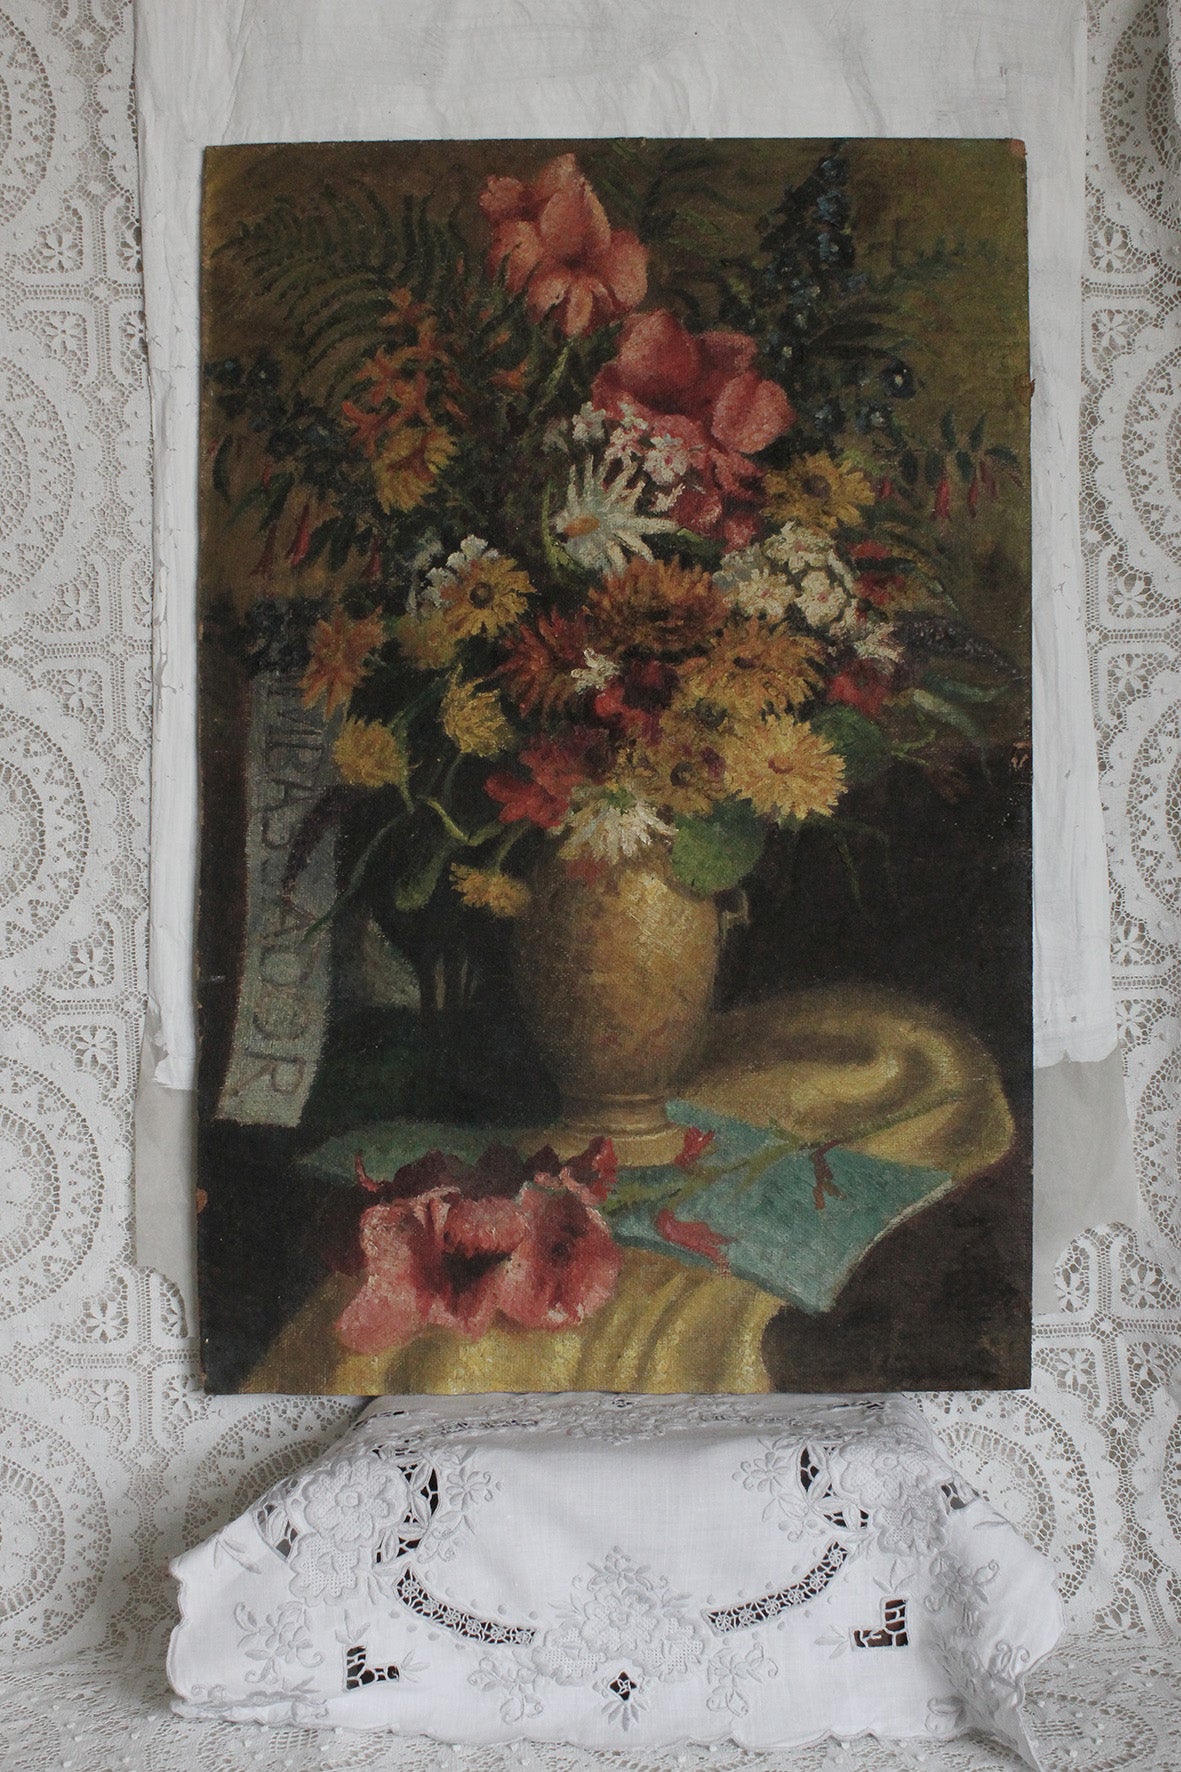 Wonderful Mid Century Oil Painting - "Best in Show" Still Life